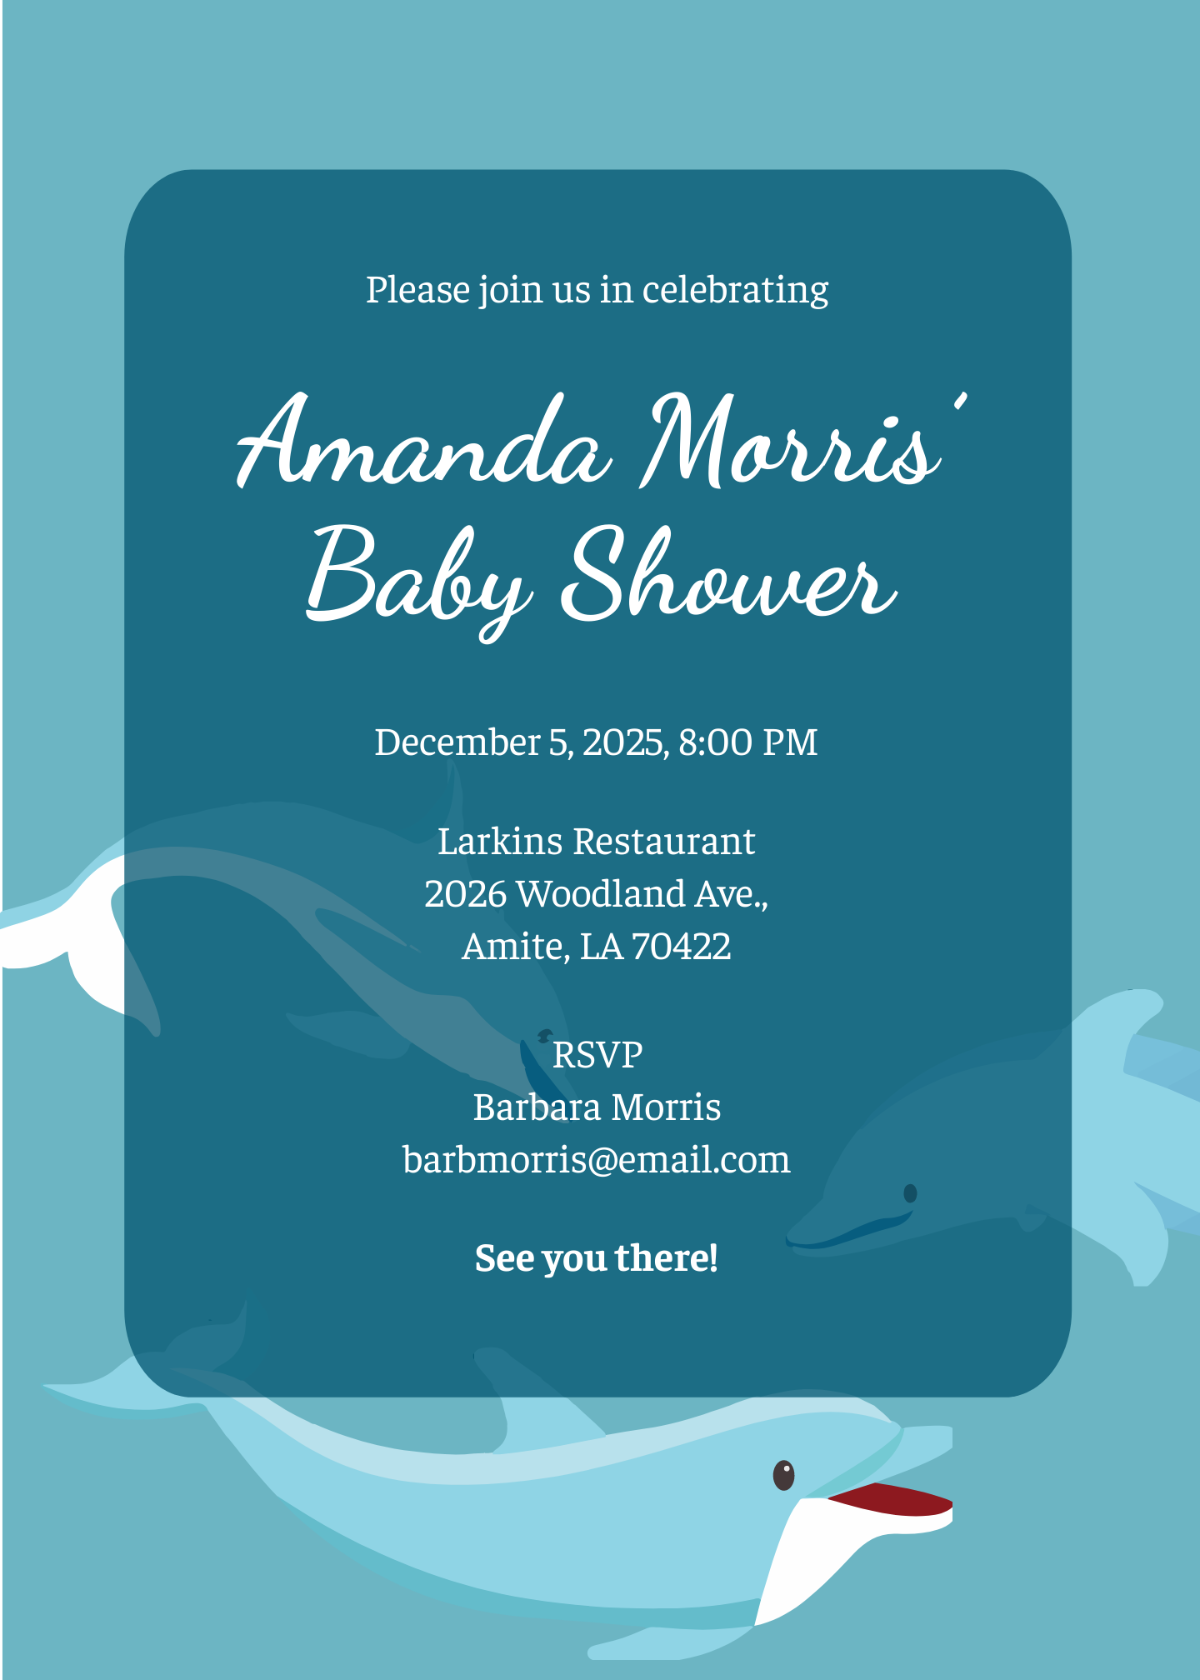 Printable Baby Shower Invitation Template